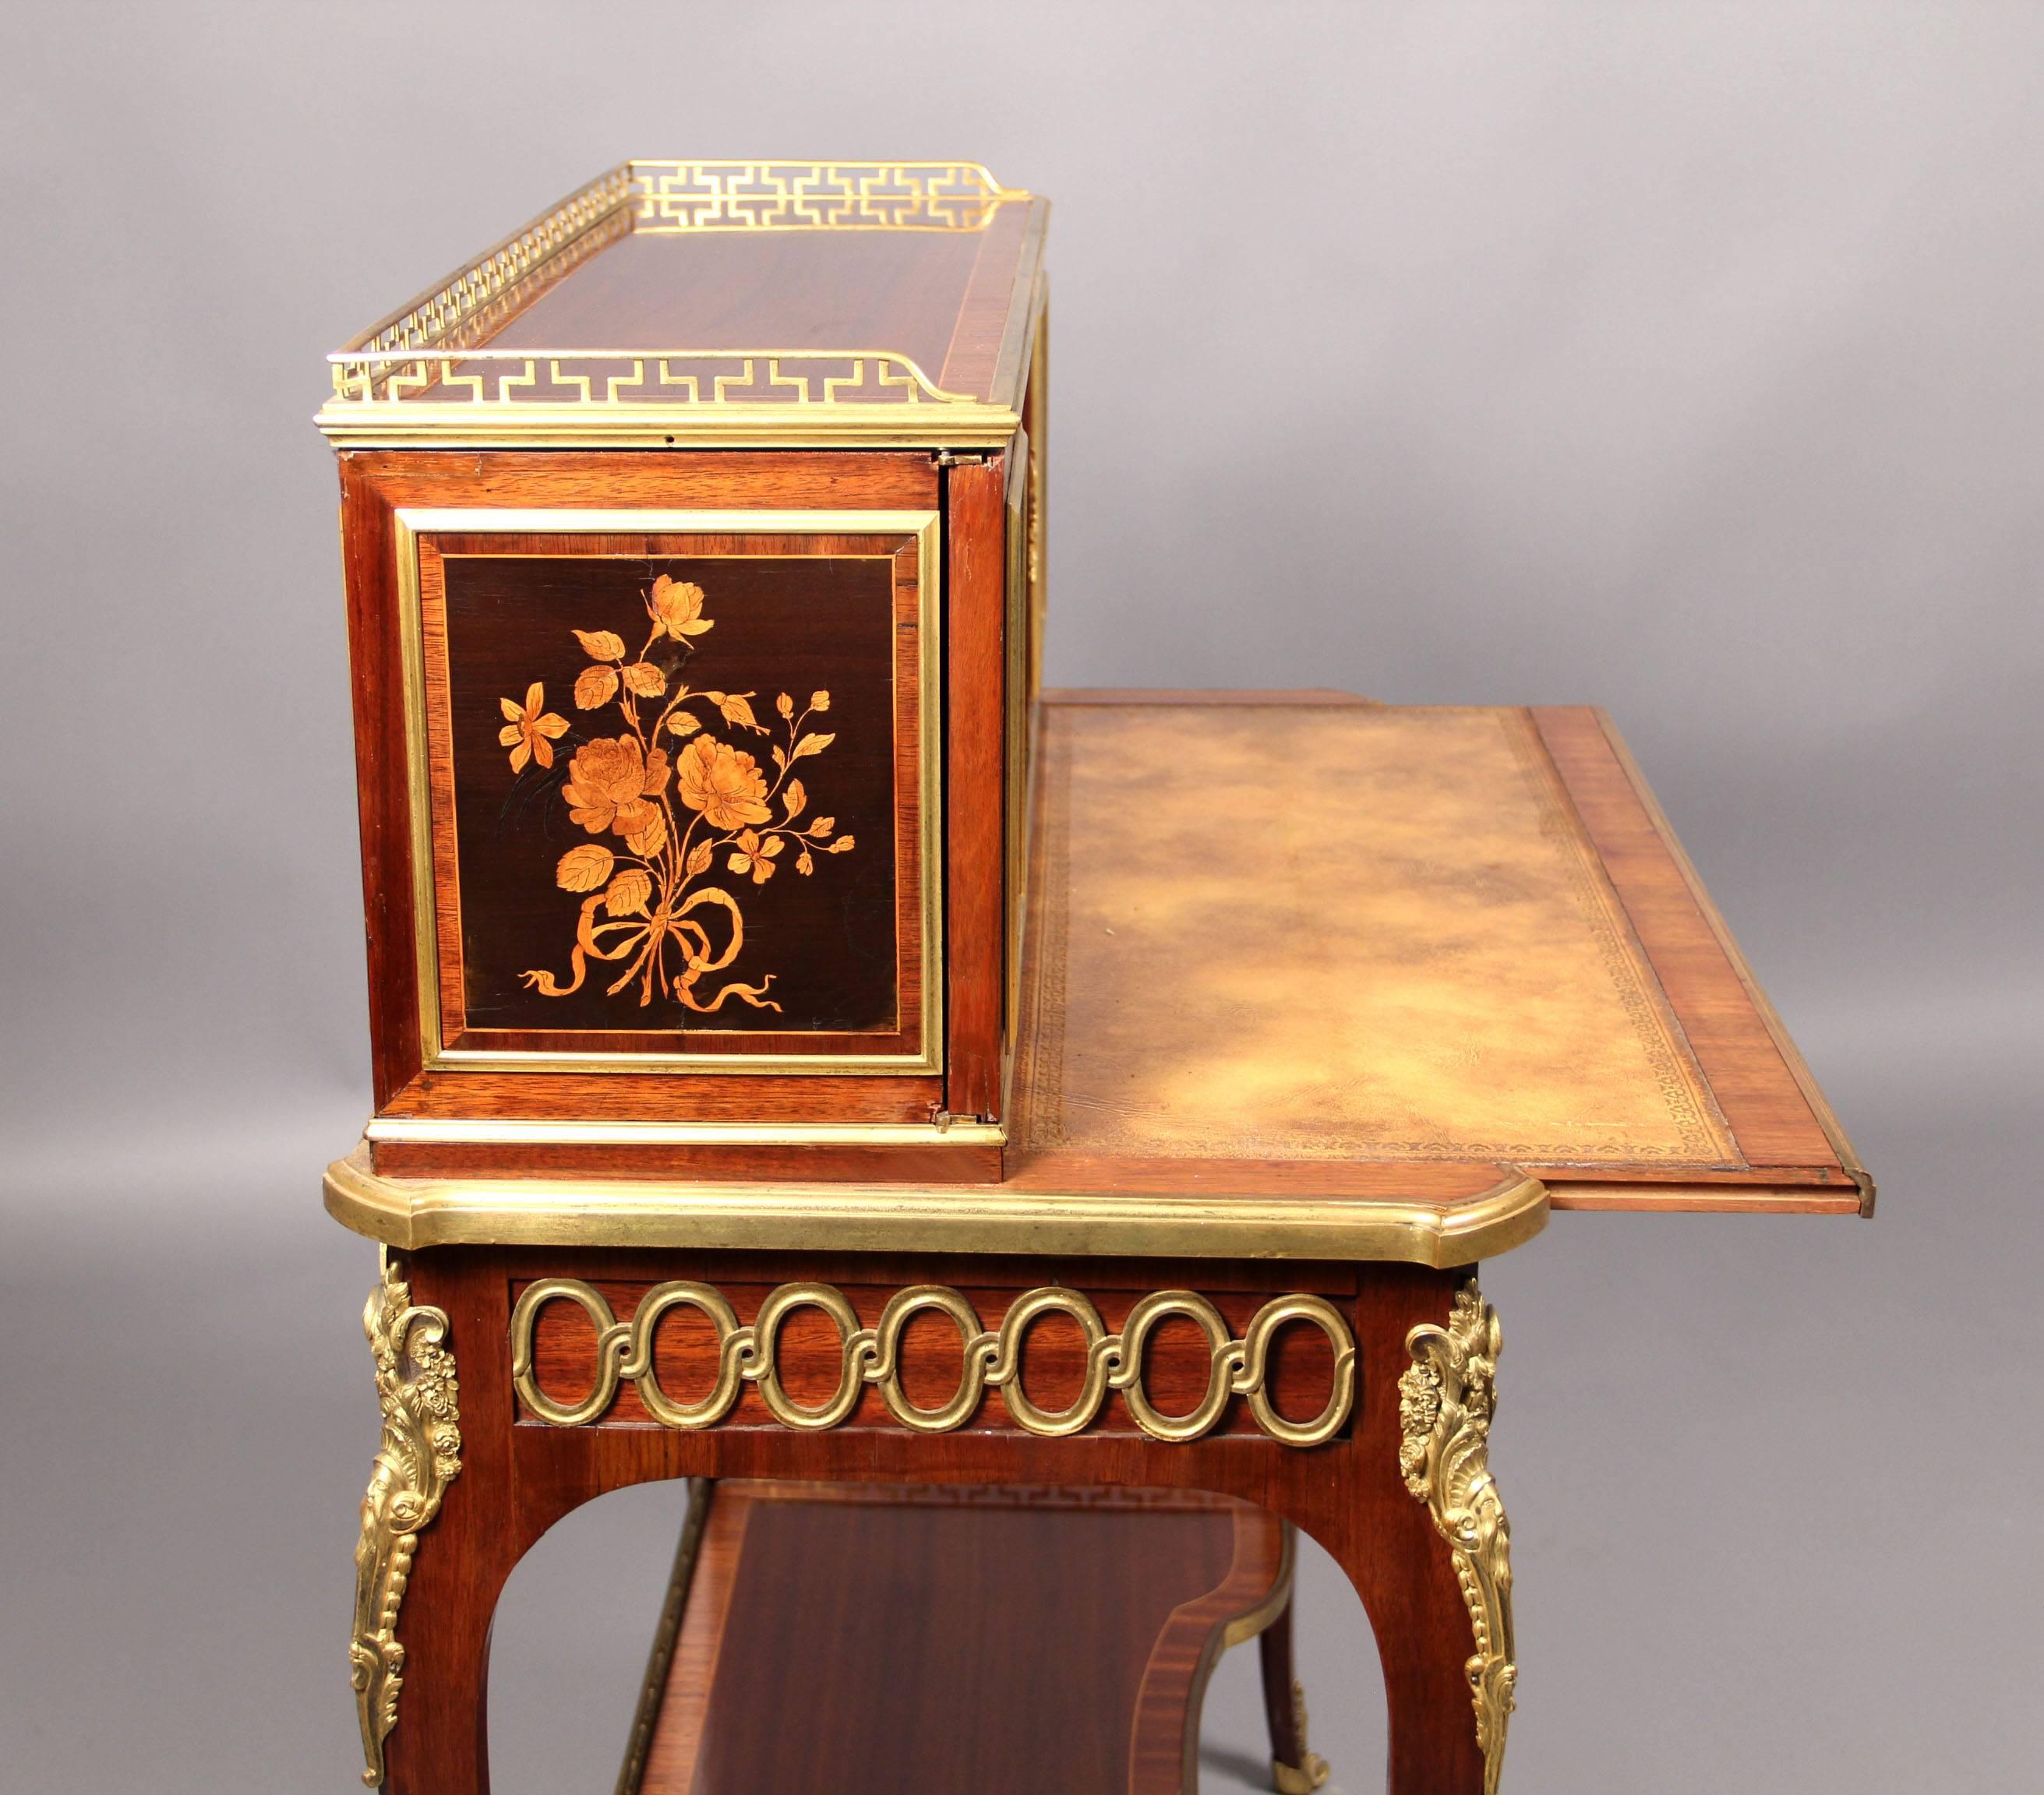 A fine mid-19th century Louis XV style gilt bronze-mounted marquetry desk

By Guillaume-Edmond Lexcellent

The upper structure consisting of two doors and a small drawer above a single long drawer, gilt bronze faces on each of the legs, the